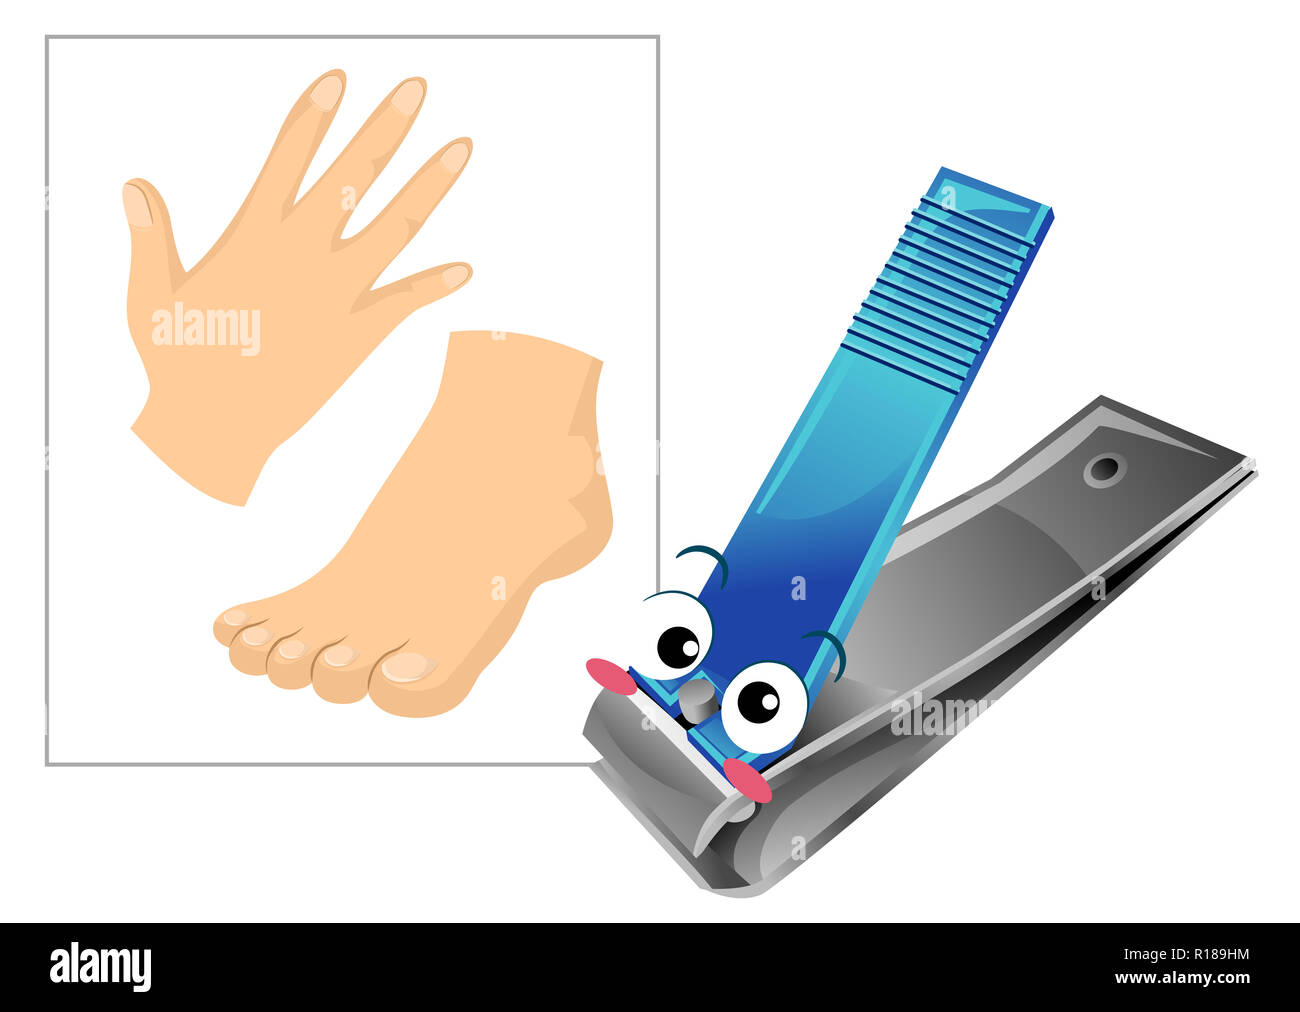 Illustration of a Nail Clipper Mascot with a Hand and Feet for Clipping  Nails Stock Photo - Alamy